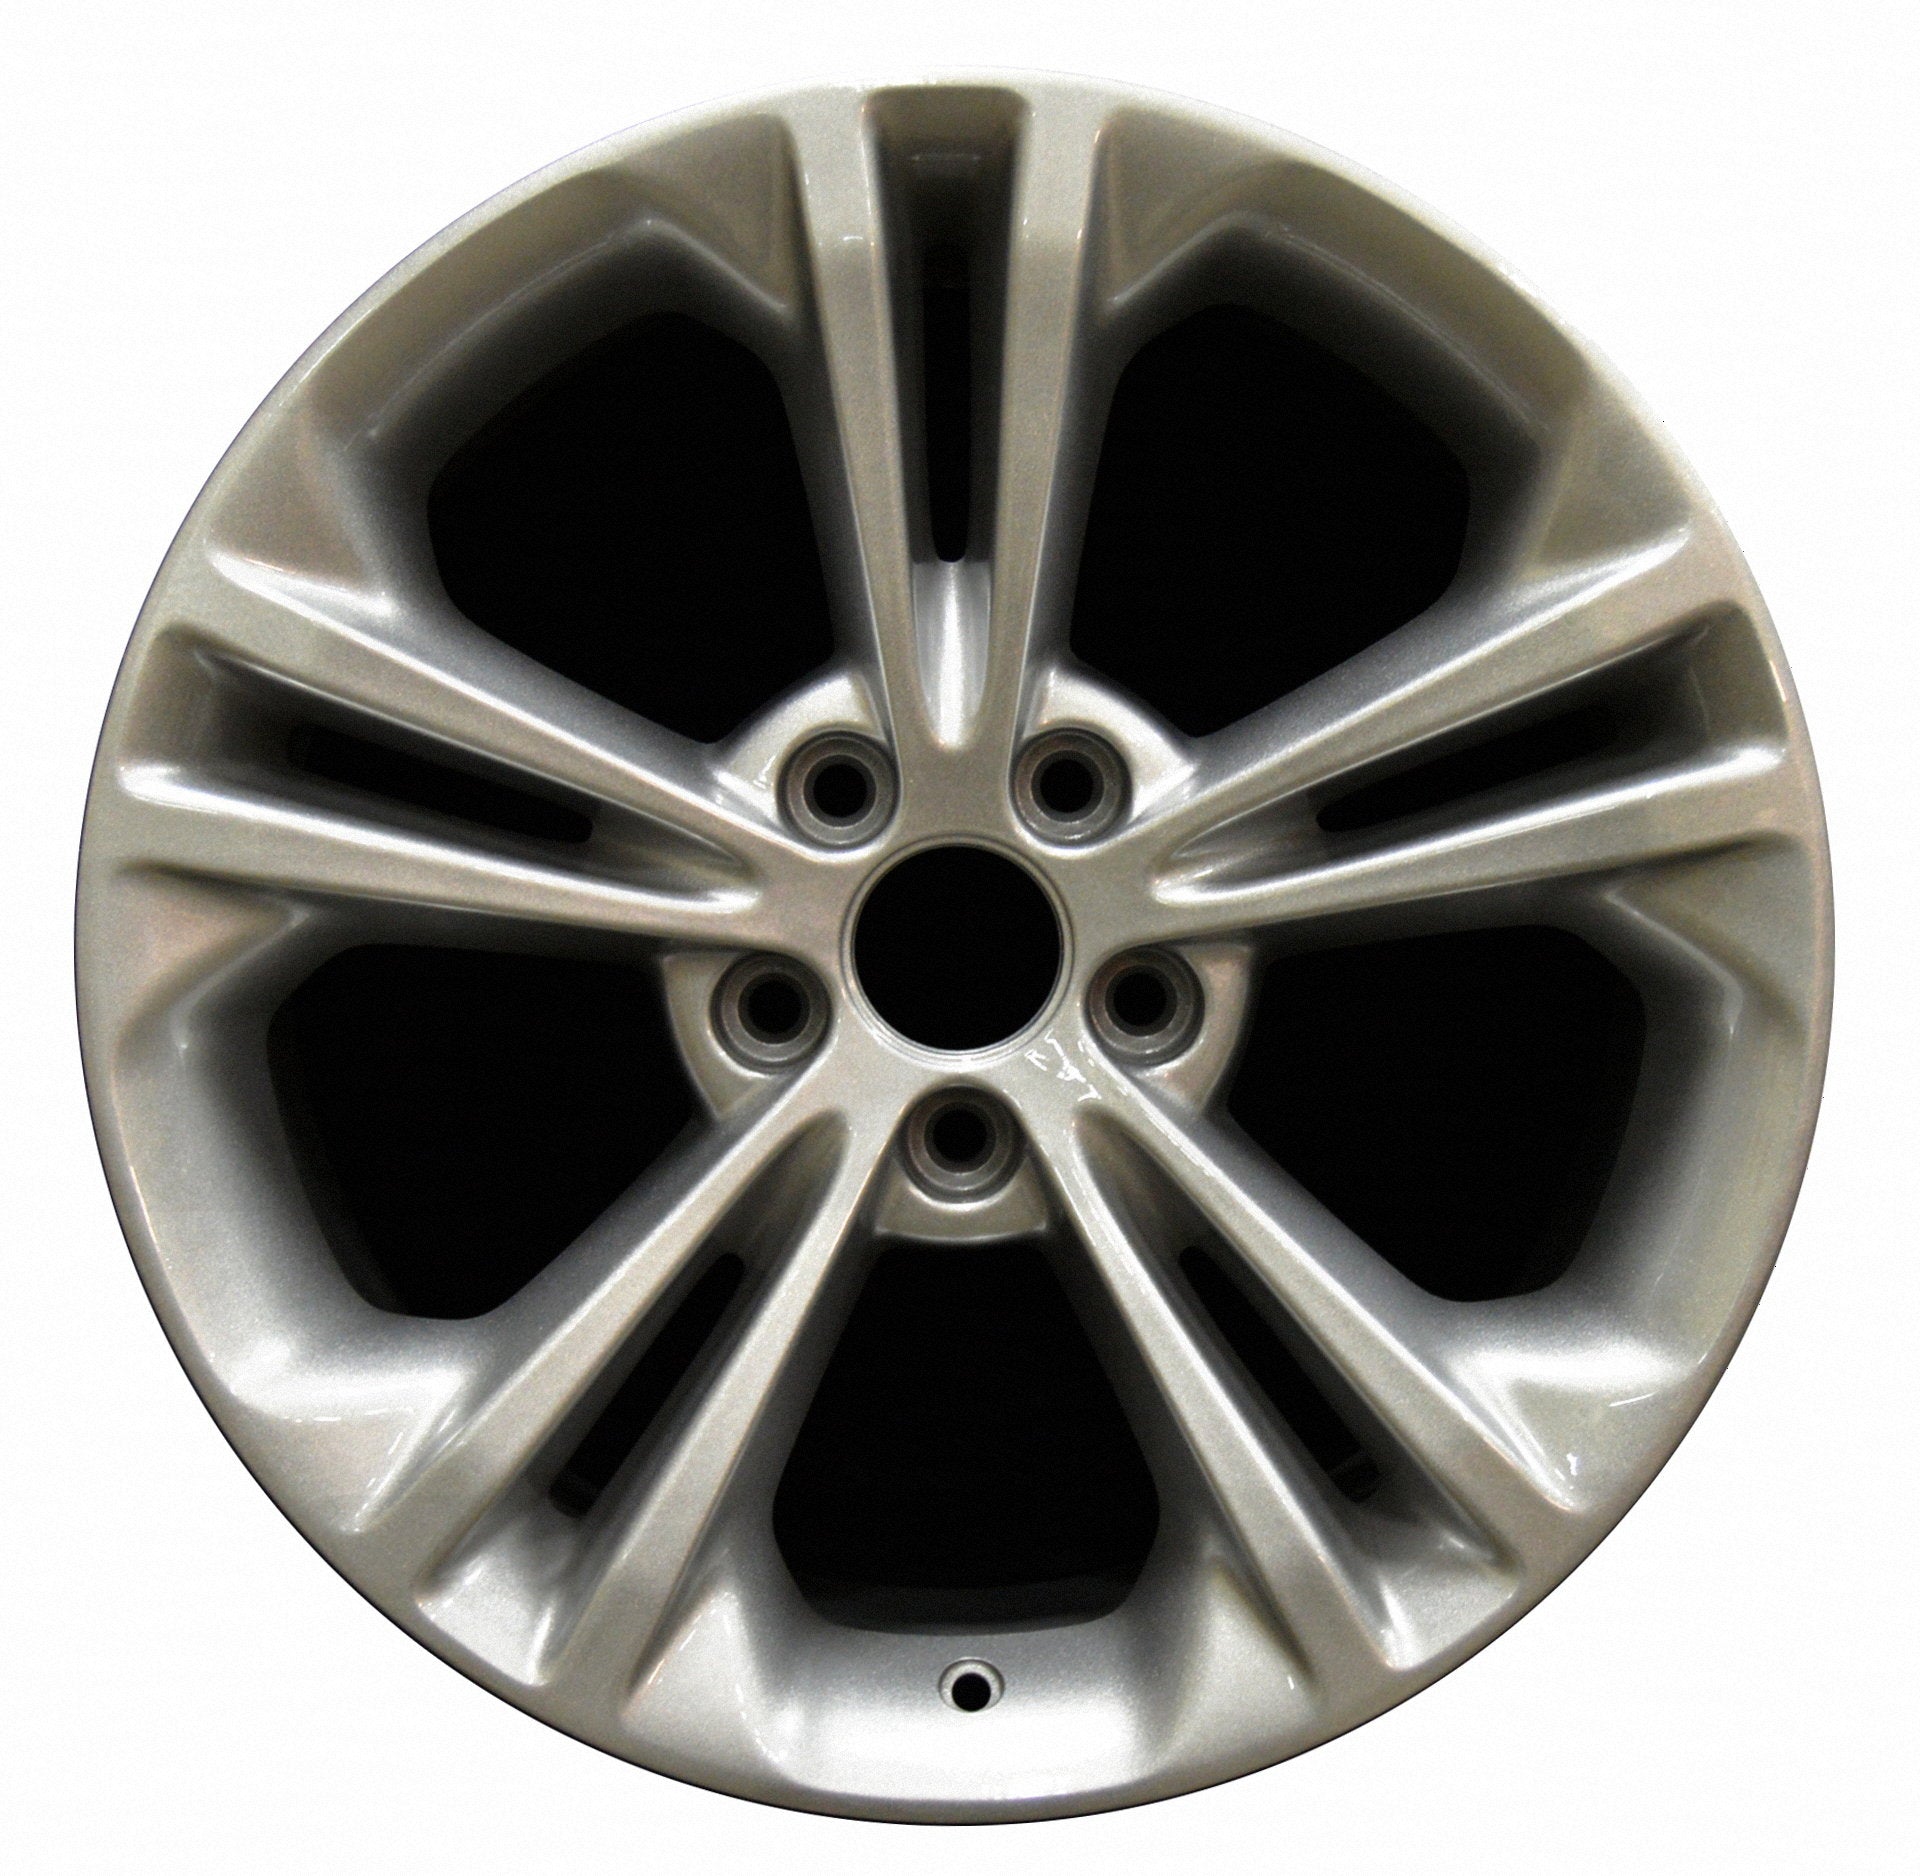 Ford Taurus  2013, 2014, 2015, 2016, 2017 Factory OEM Car Wheel Size 18x8 Alloy WAO.3922.PS08.FF